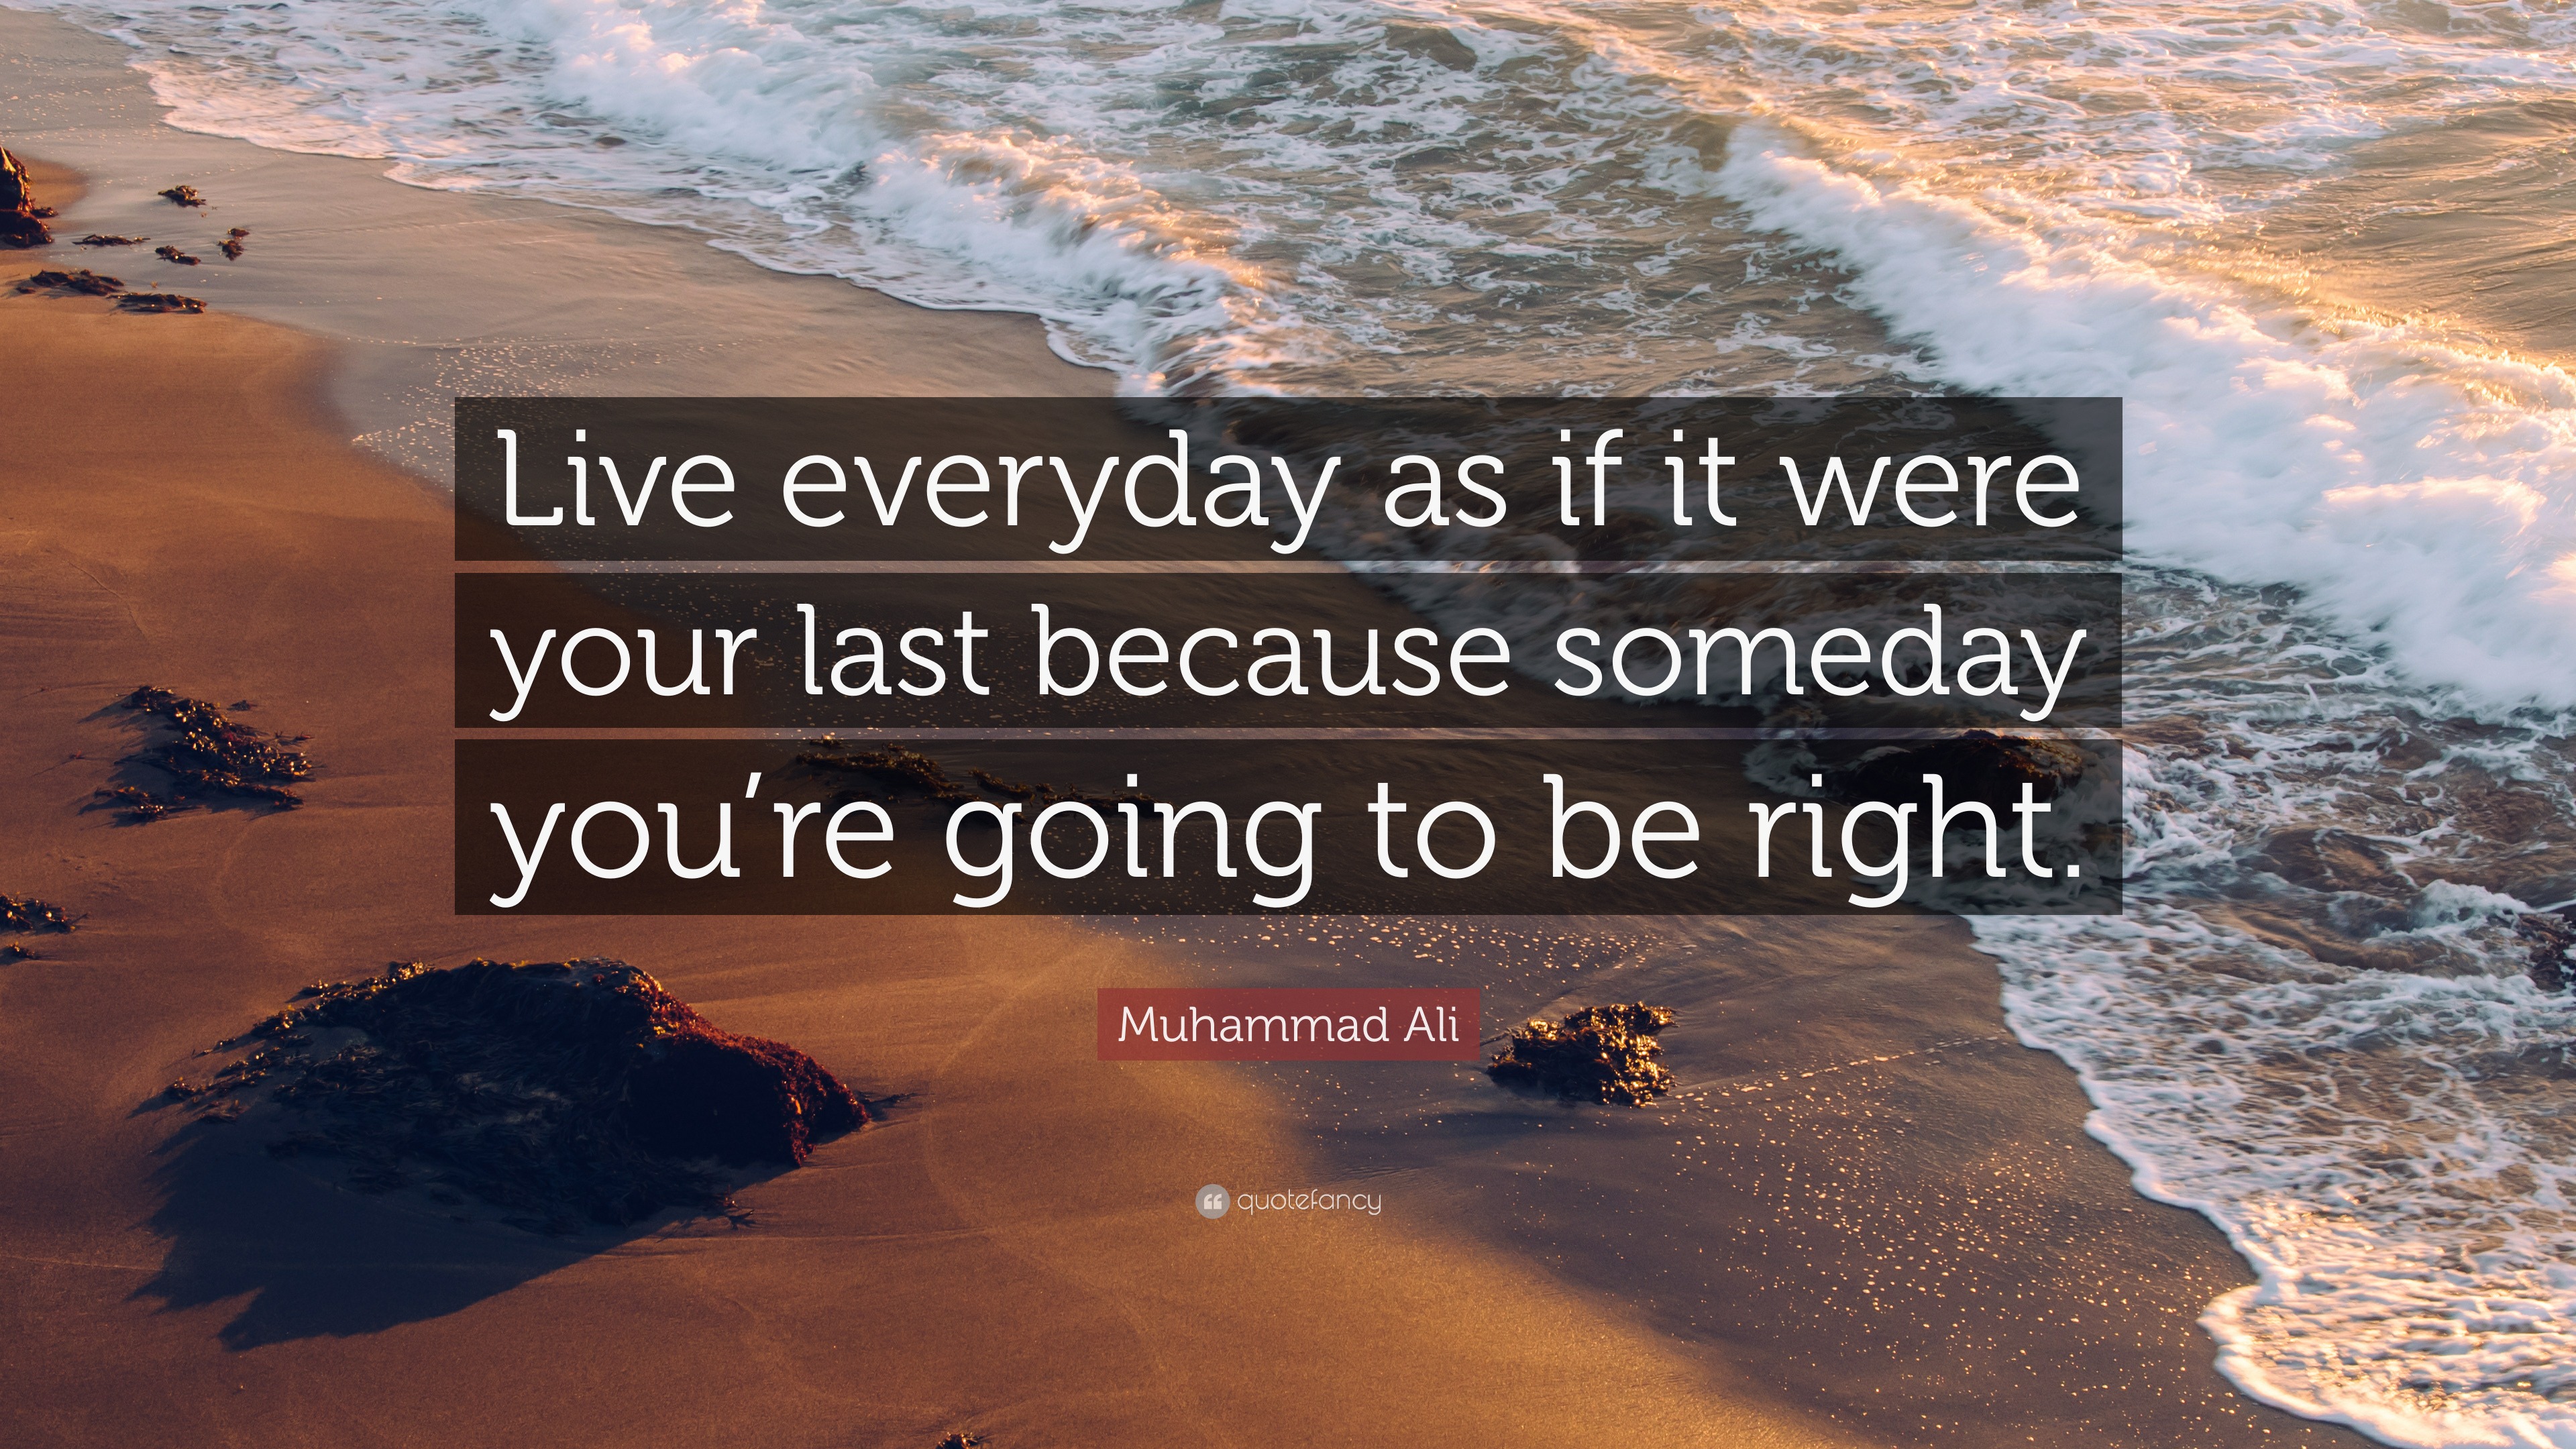 Muhammad Ali Quote: “Live everyday as if it were your last because